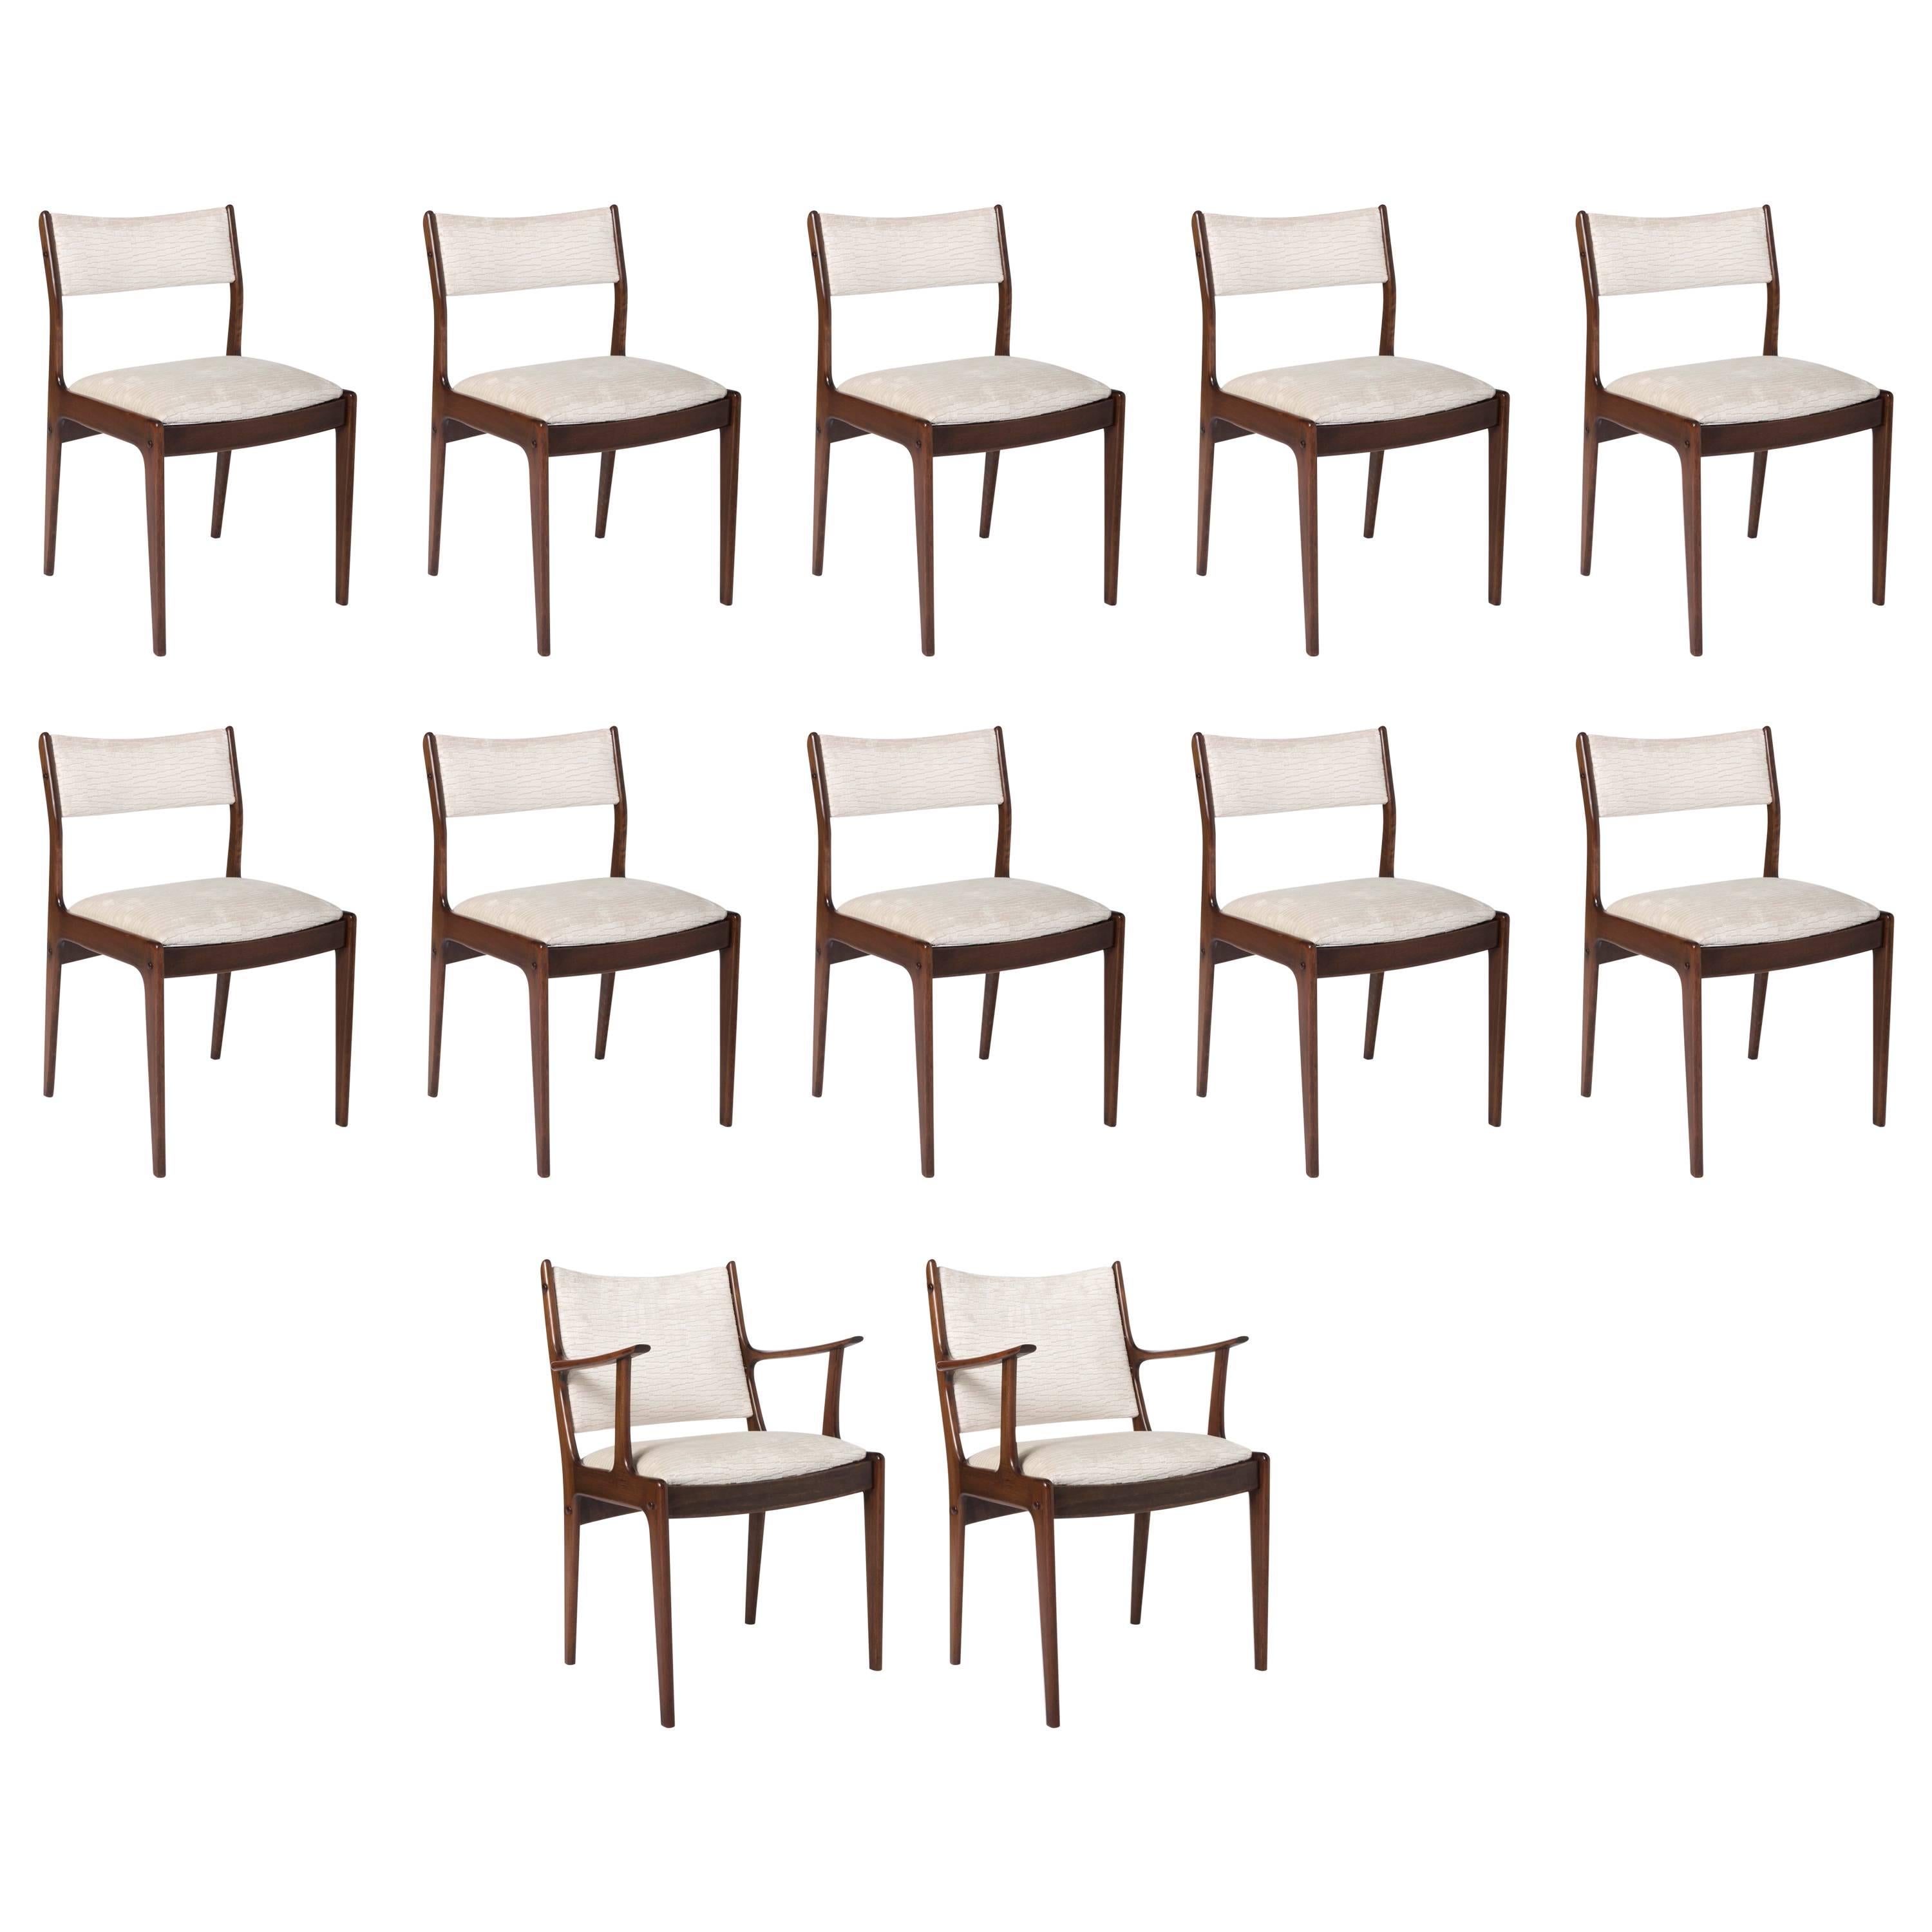 Johannes Andersen set of 12 rosewood chairs, Denmark circa 1960 For Sale